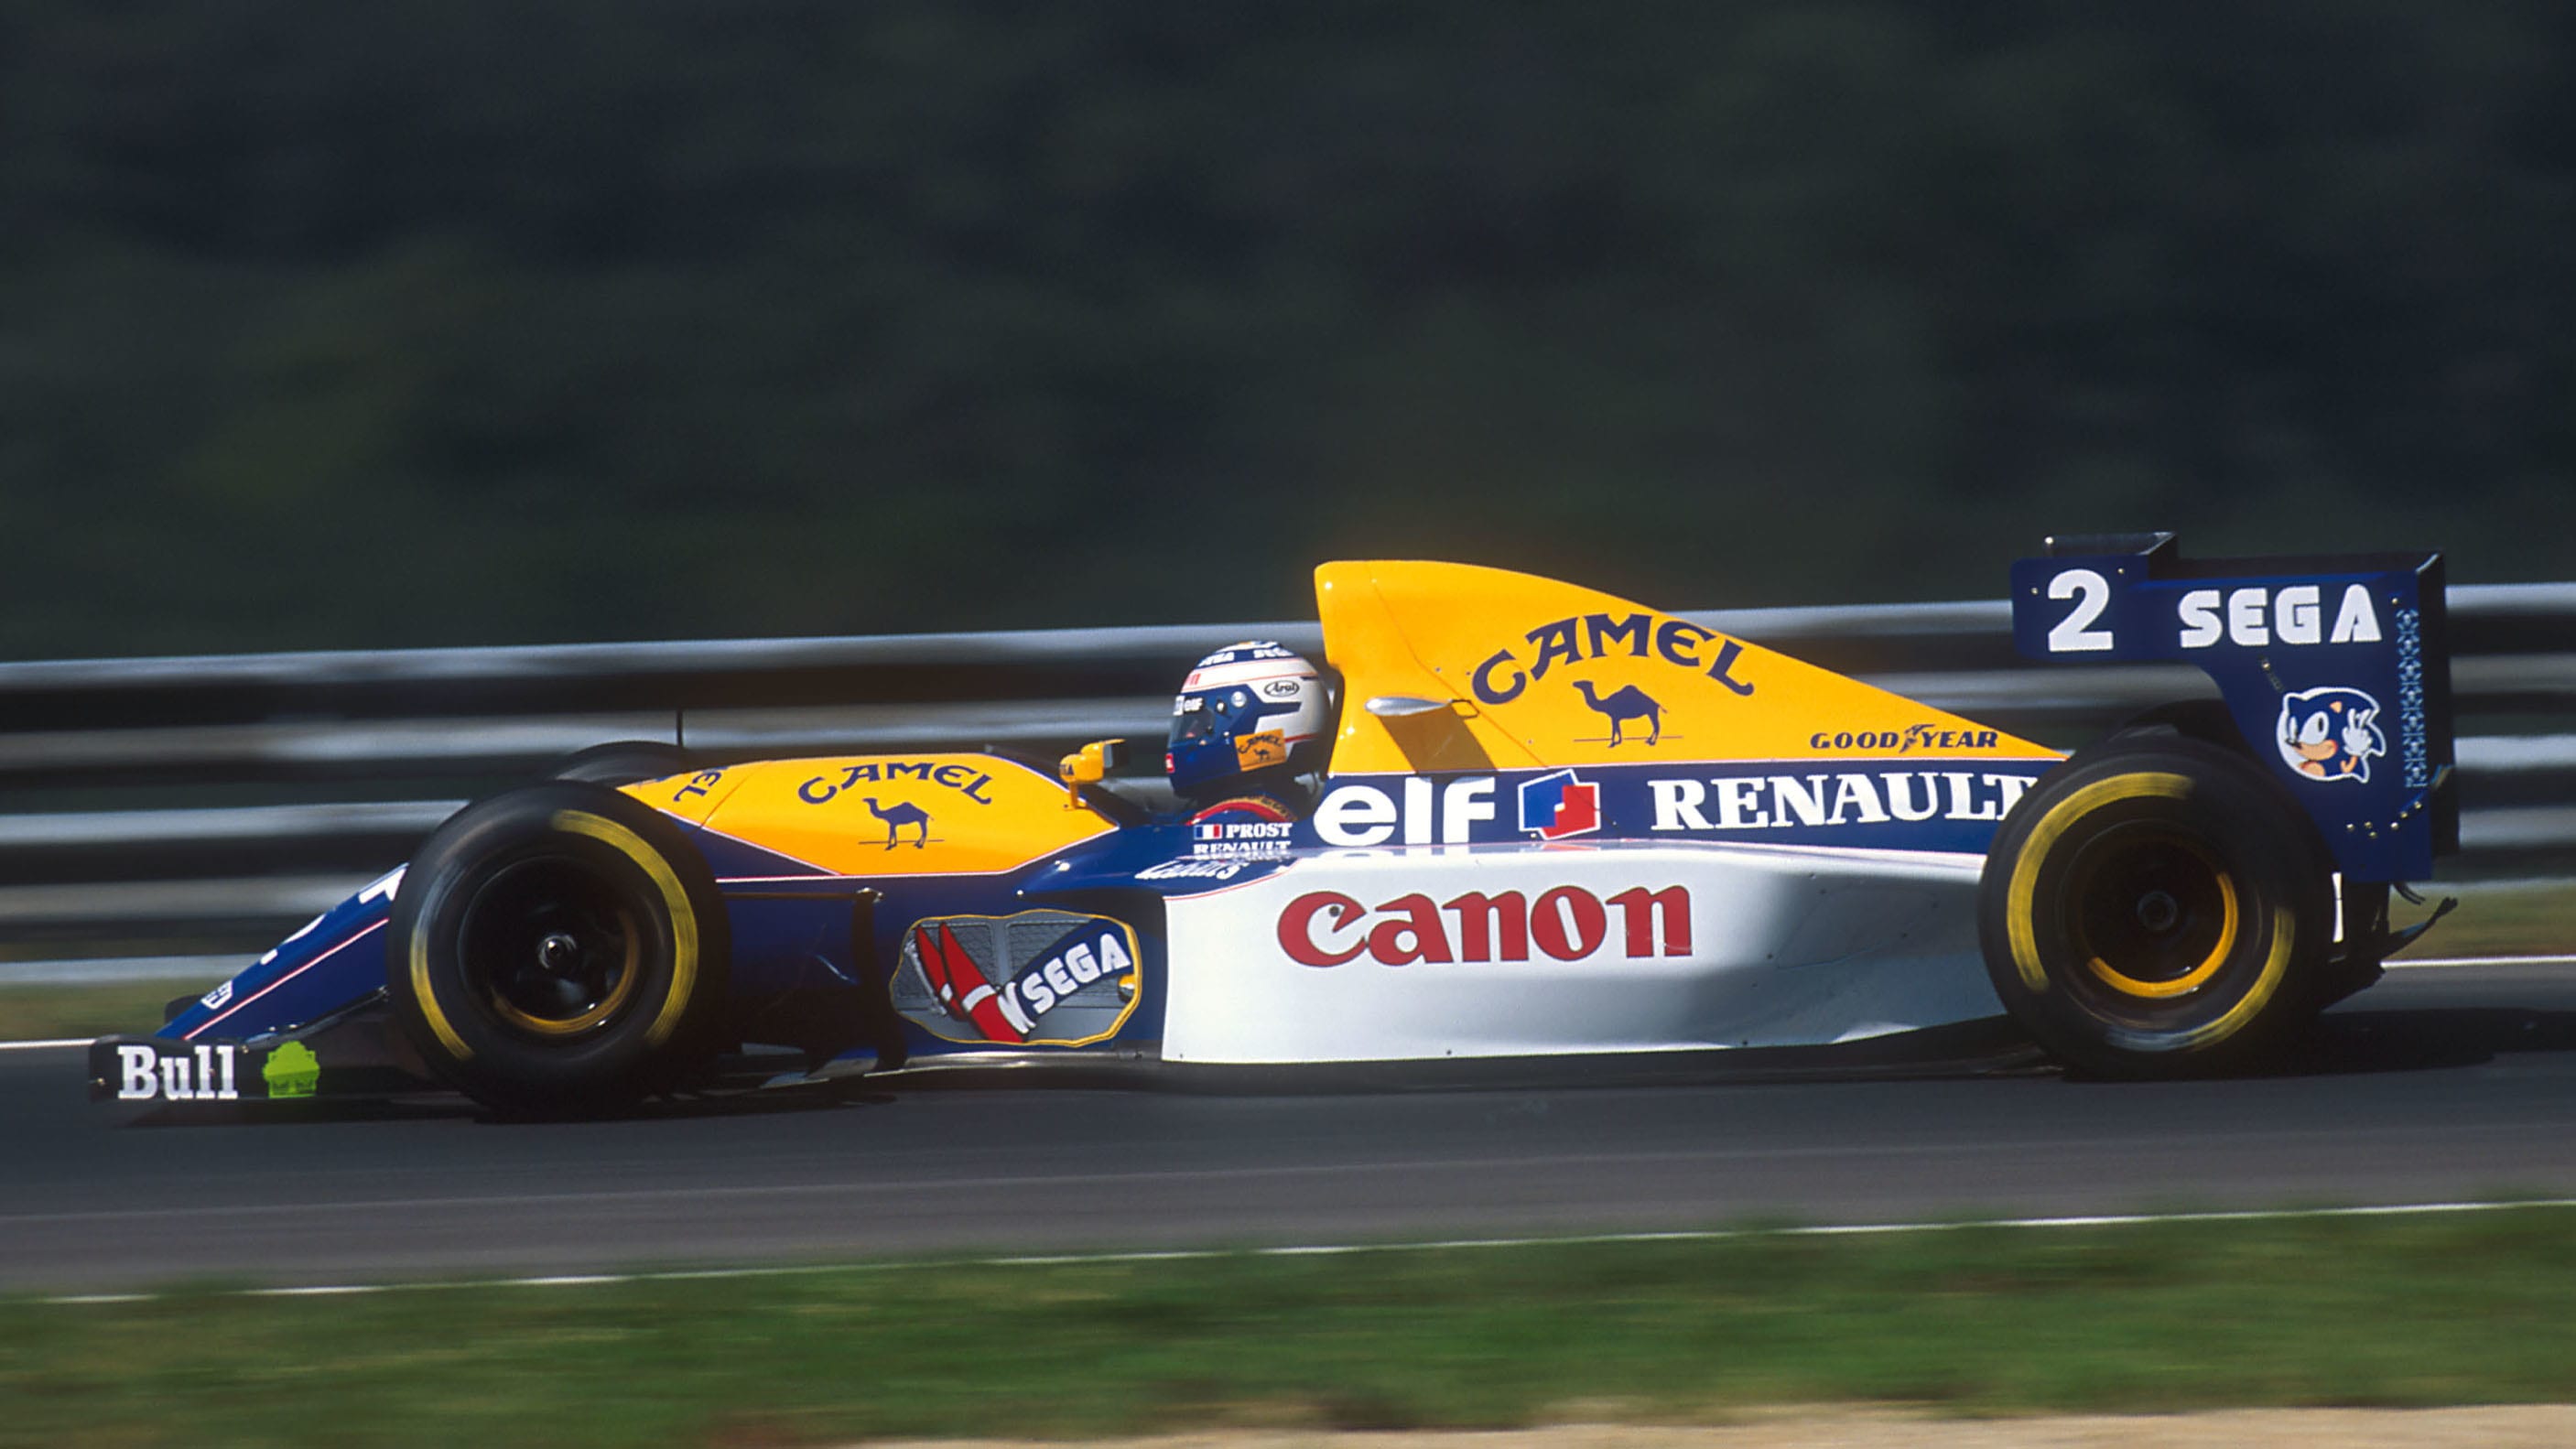 Best Williams livery of all time after launch of the 2019 FW42